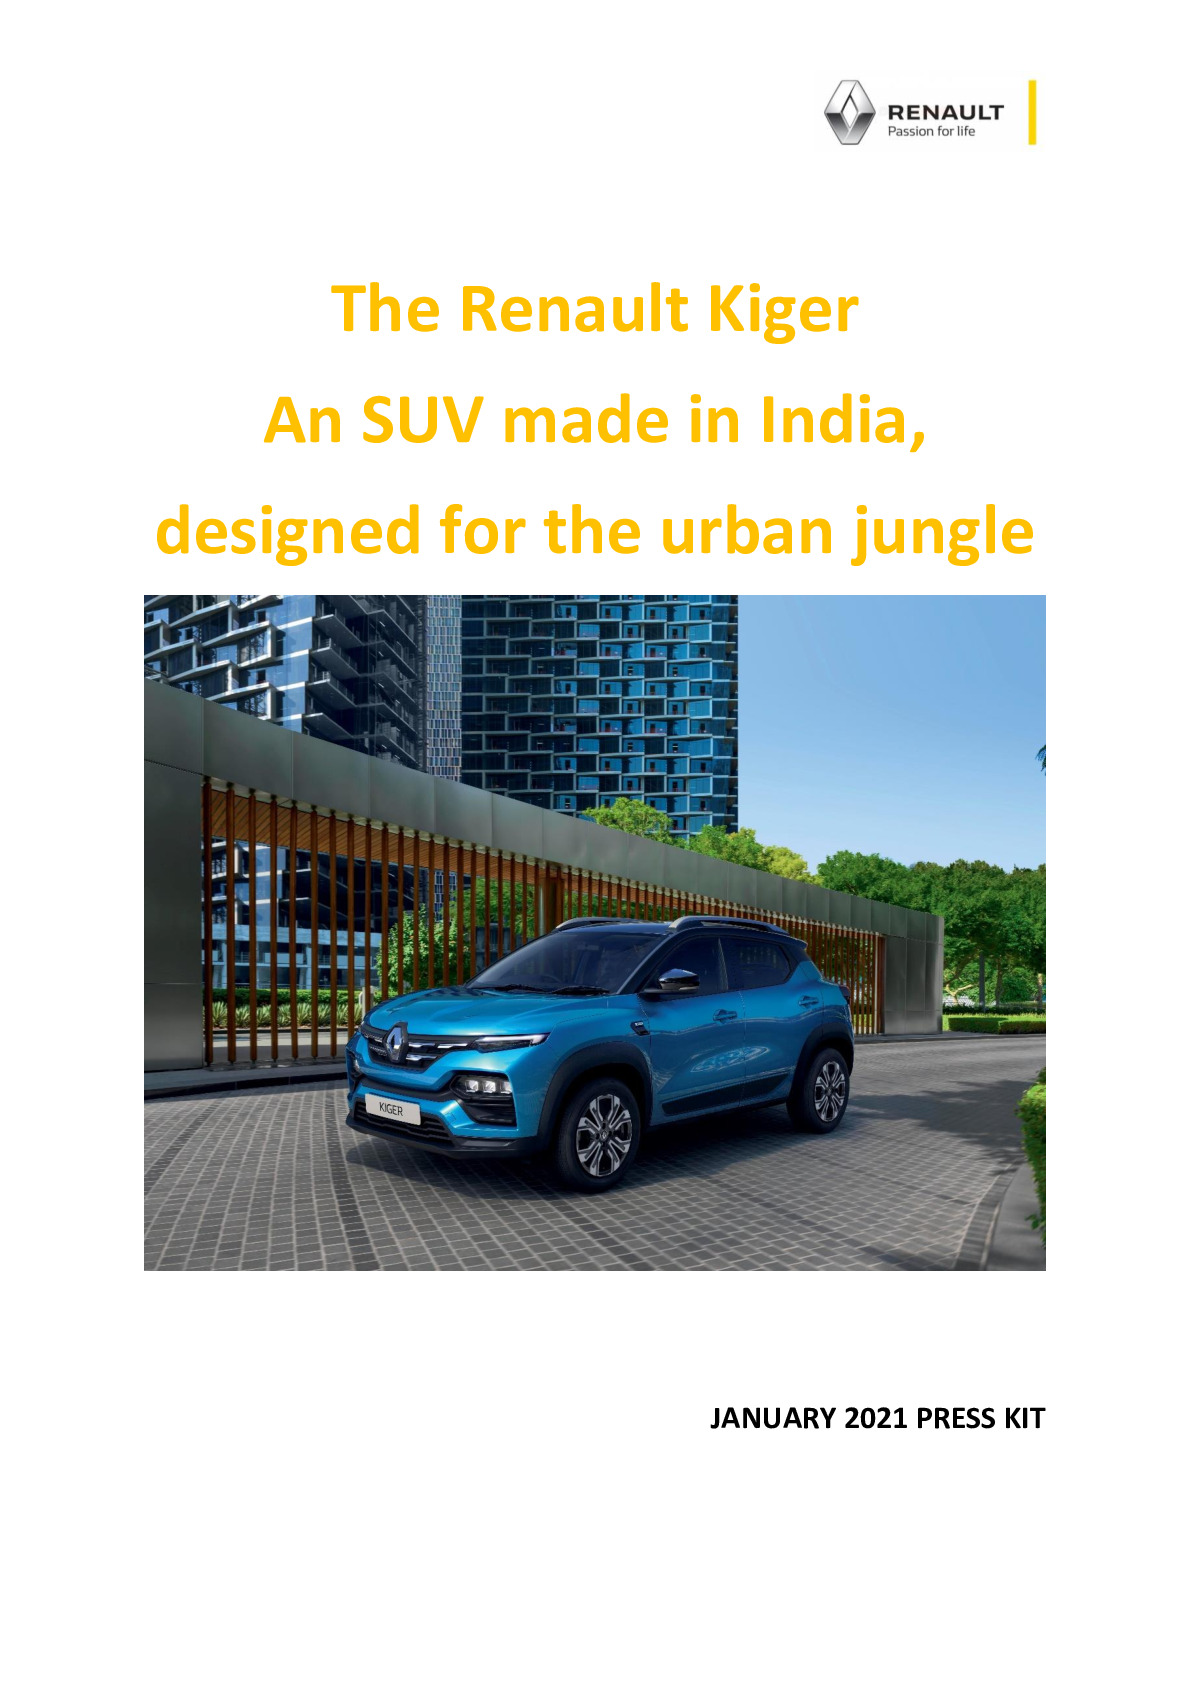 Renault Kiger: the new compact SUV for India - Site media global de Renault